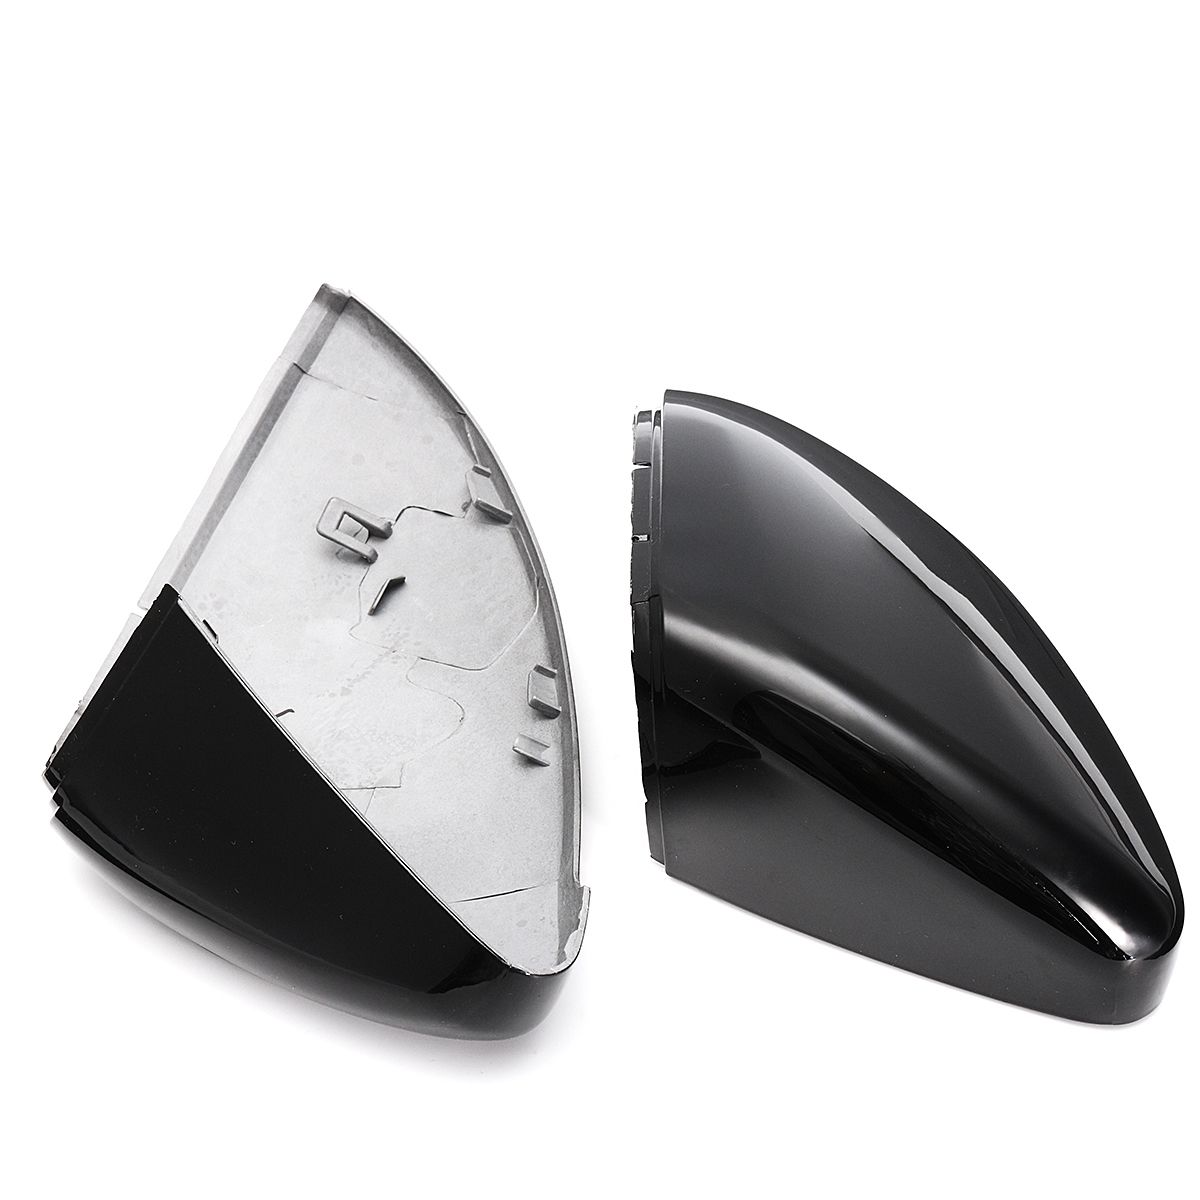 2pcs-1-Pair-Front-Wing-Mirror-Cover-Wing-Case-Rear-View-Mirror-Case-Cover-For-VW-1180490